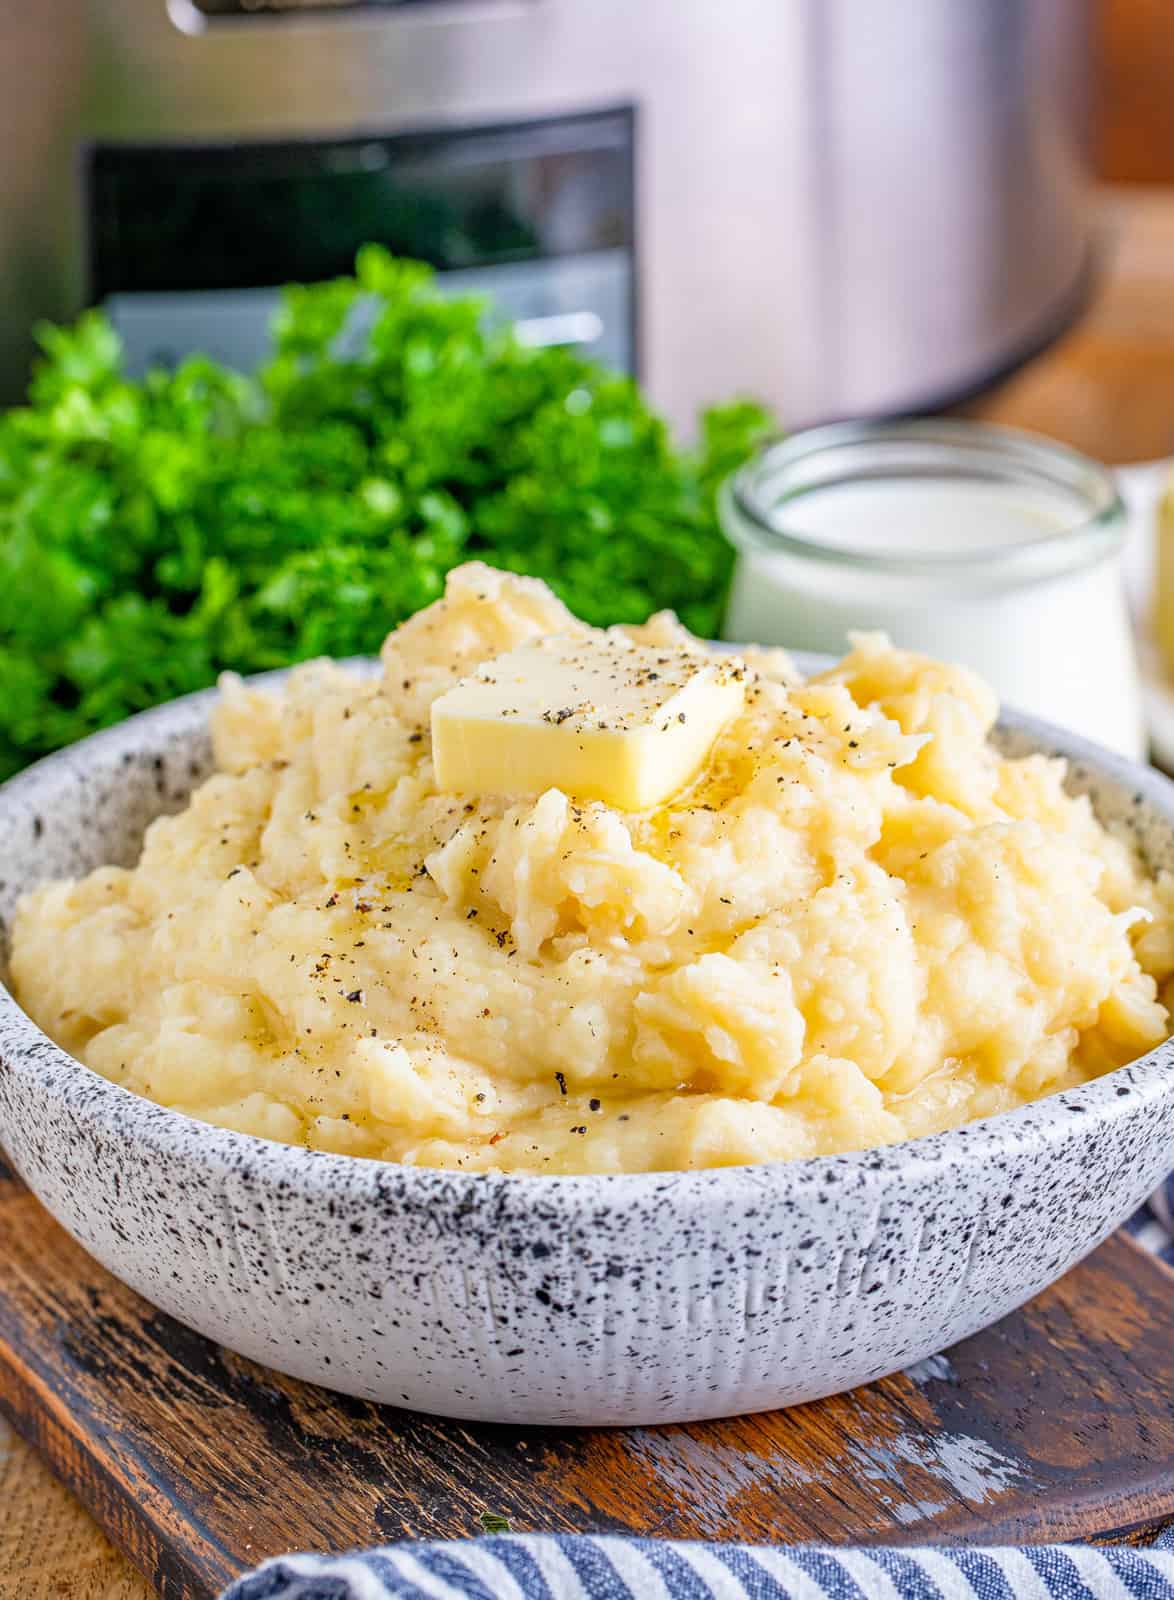 Crockpot Mashed Potatoes in serving bowl with parsley and crockpot in background.